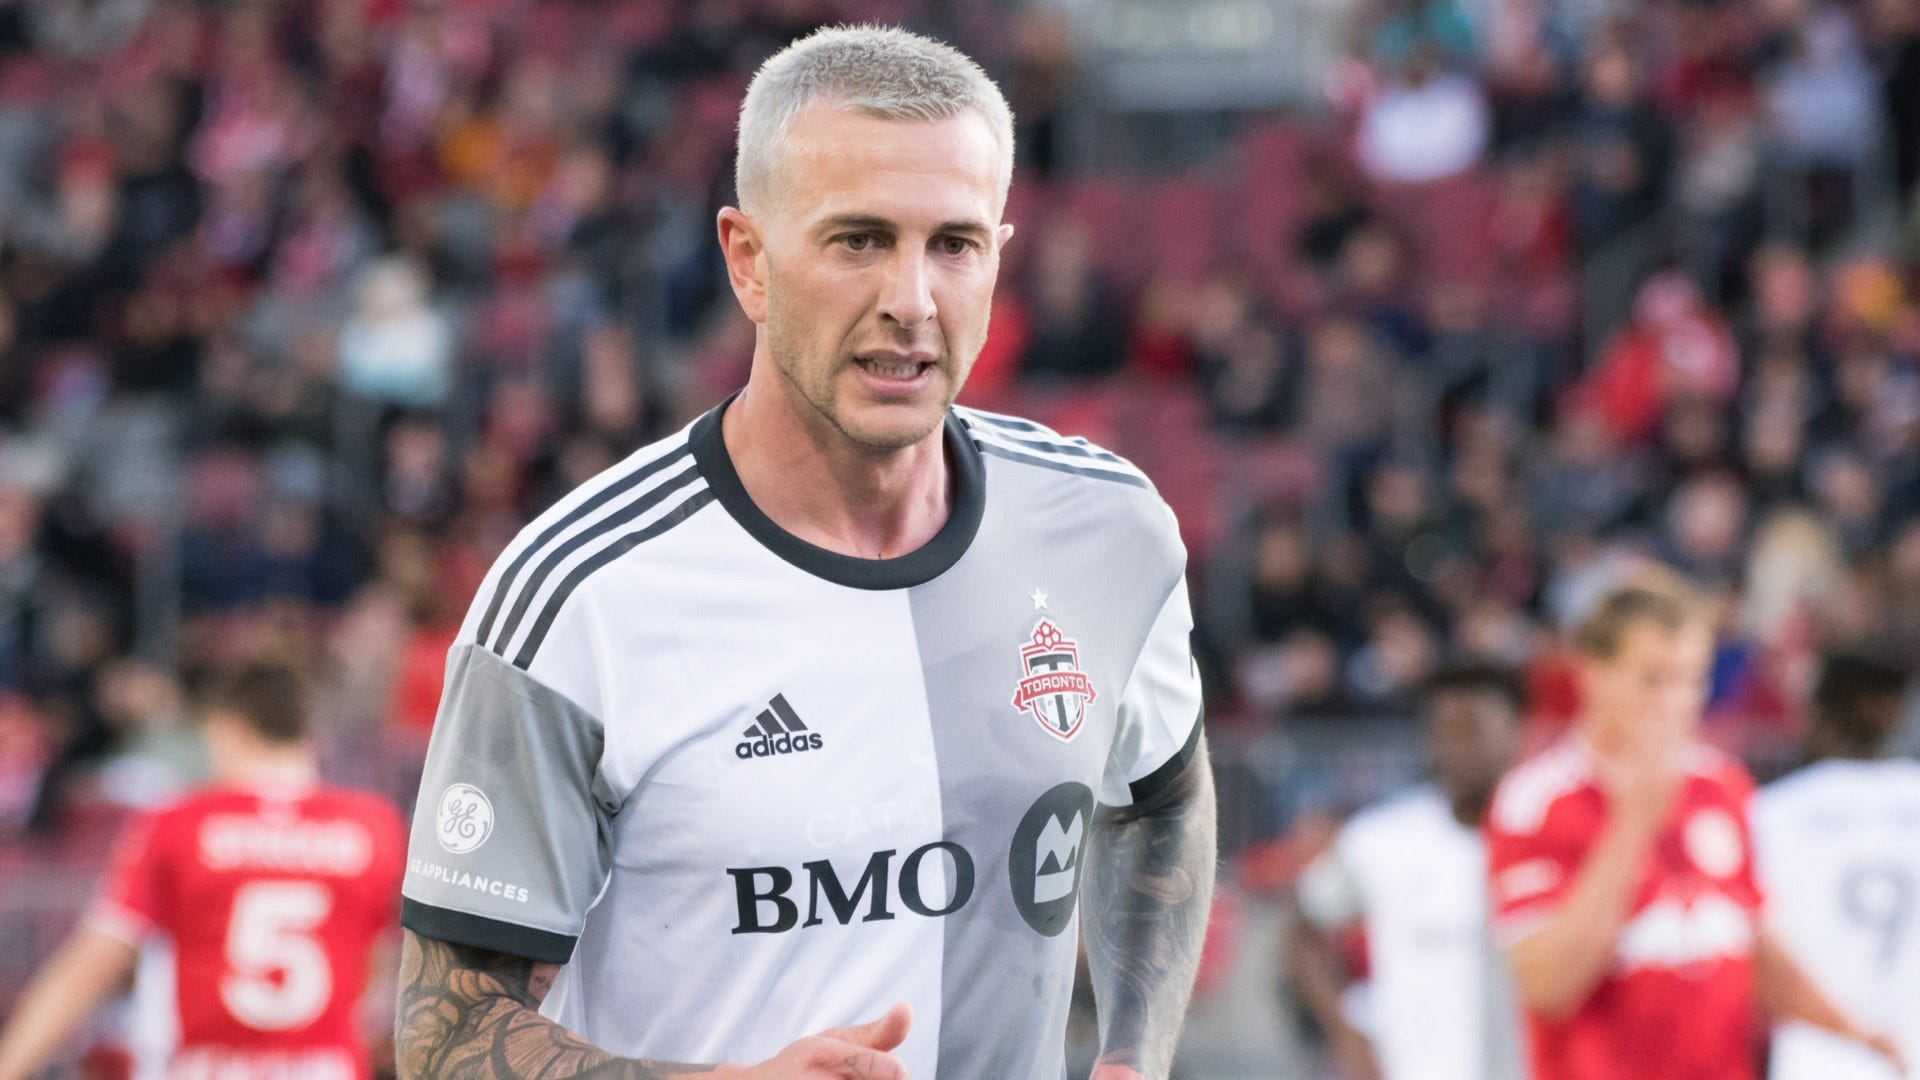 Toronto FC coach says Bernardeschi was 'out of line' with post-game outburst